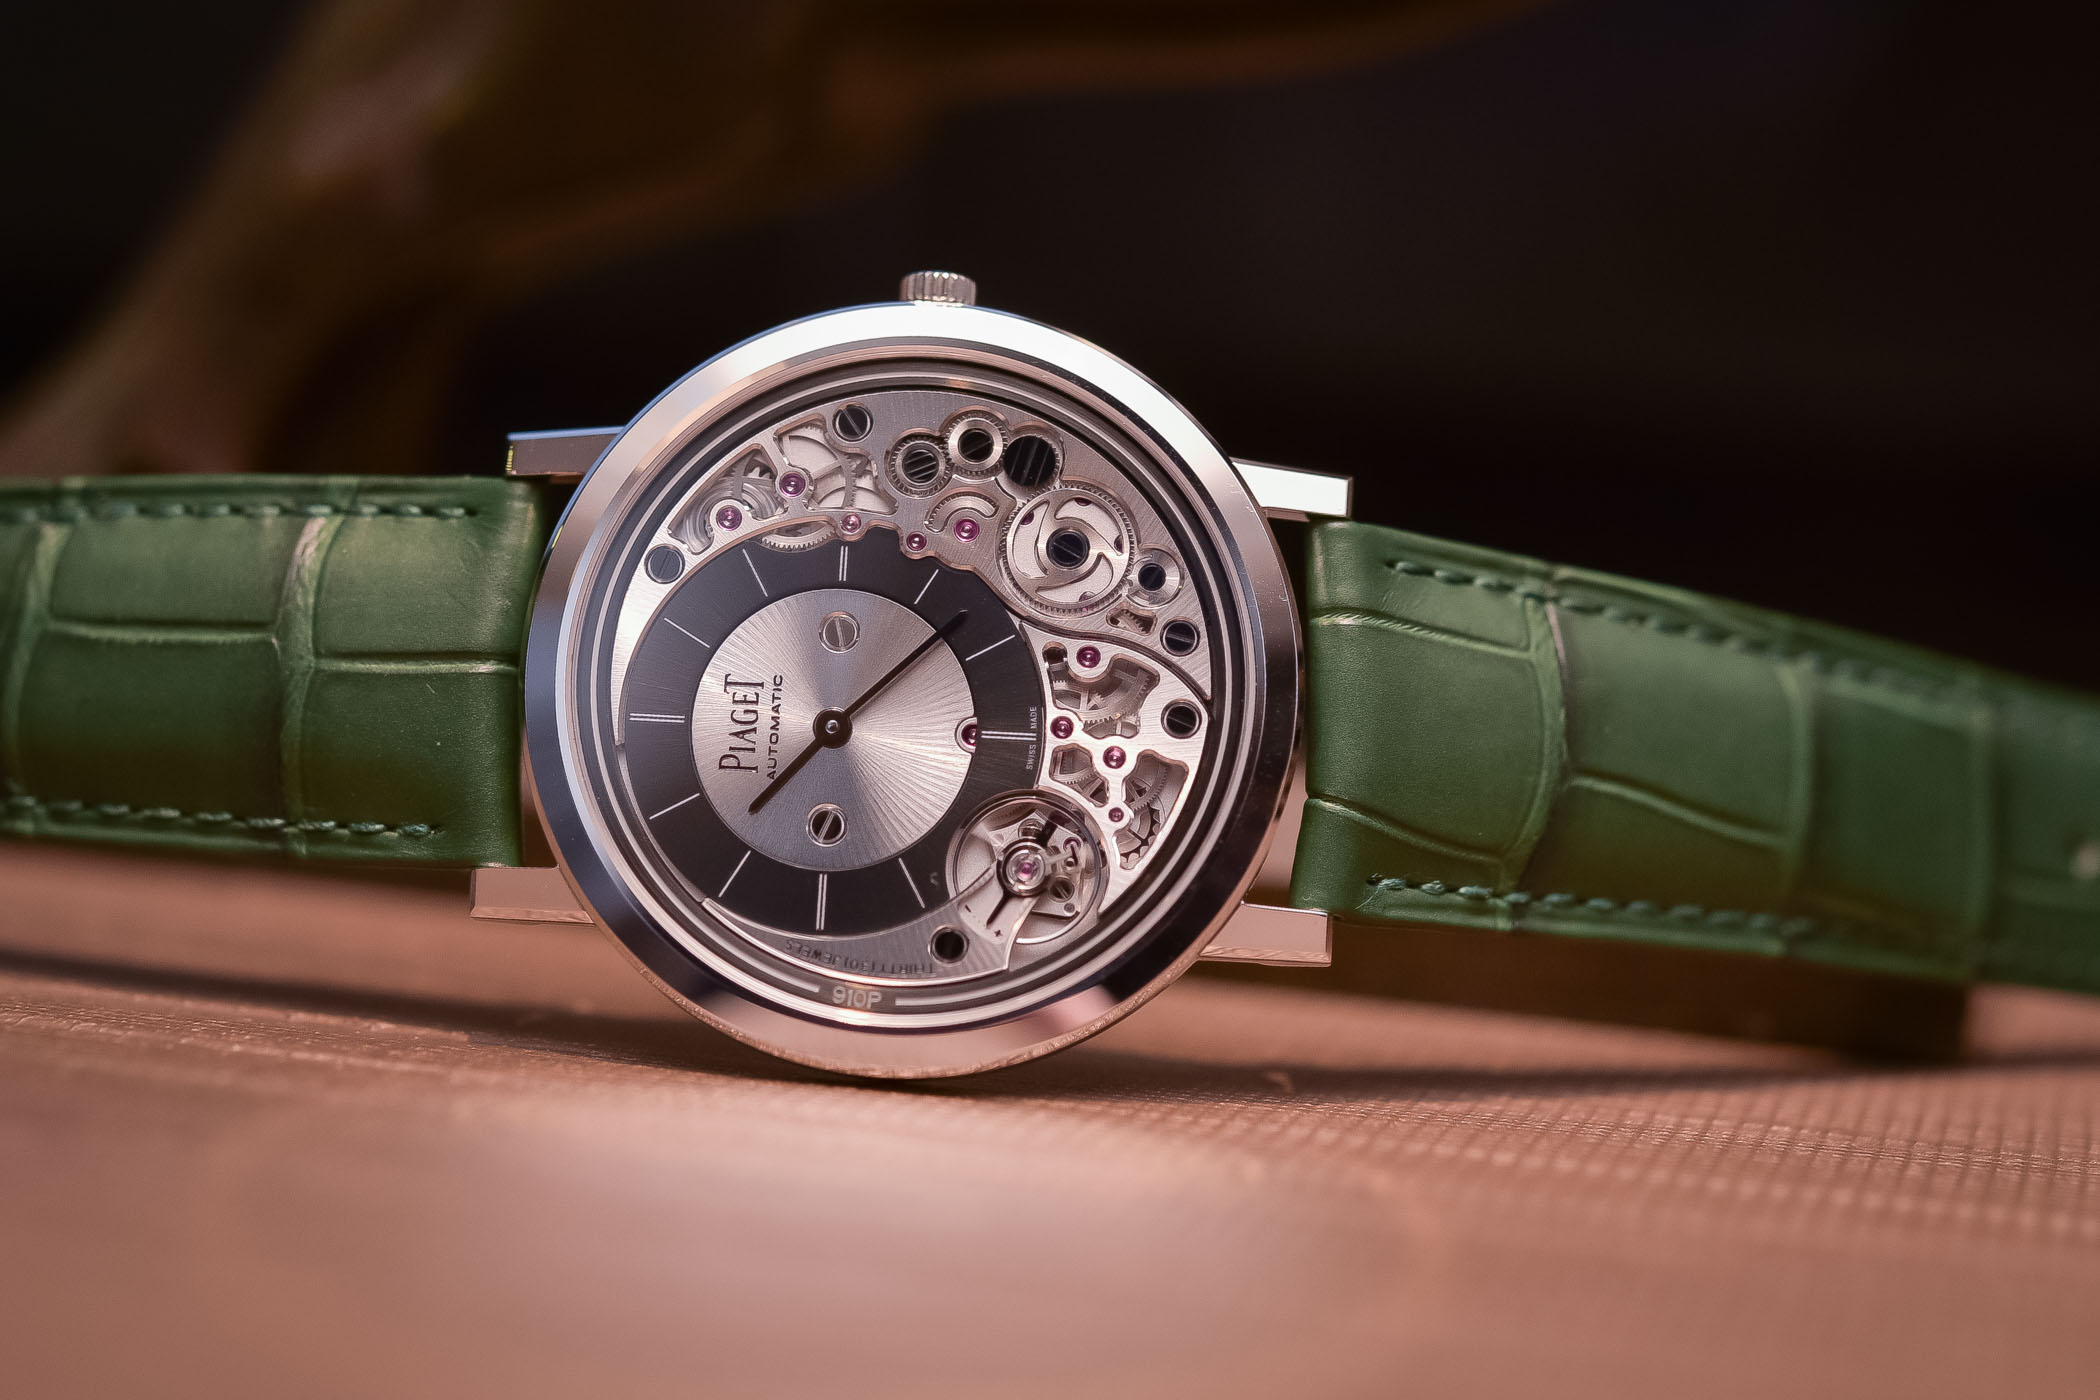 Piaget Altiplano Ultimate Automatic 910P - Thinnest Automatic Watch